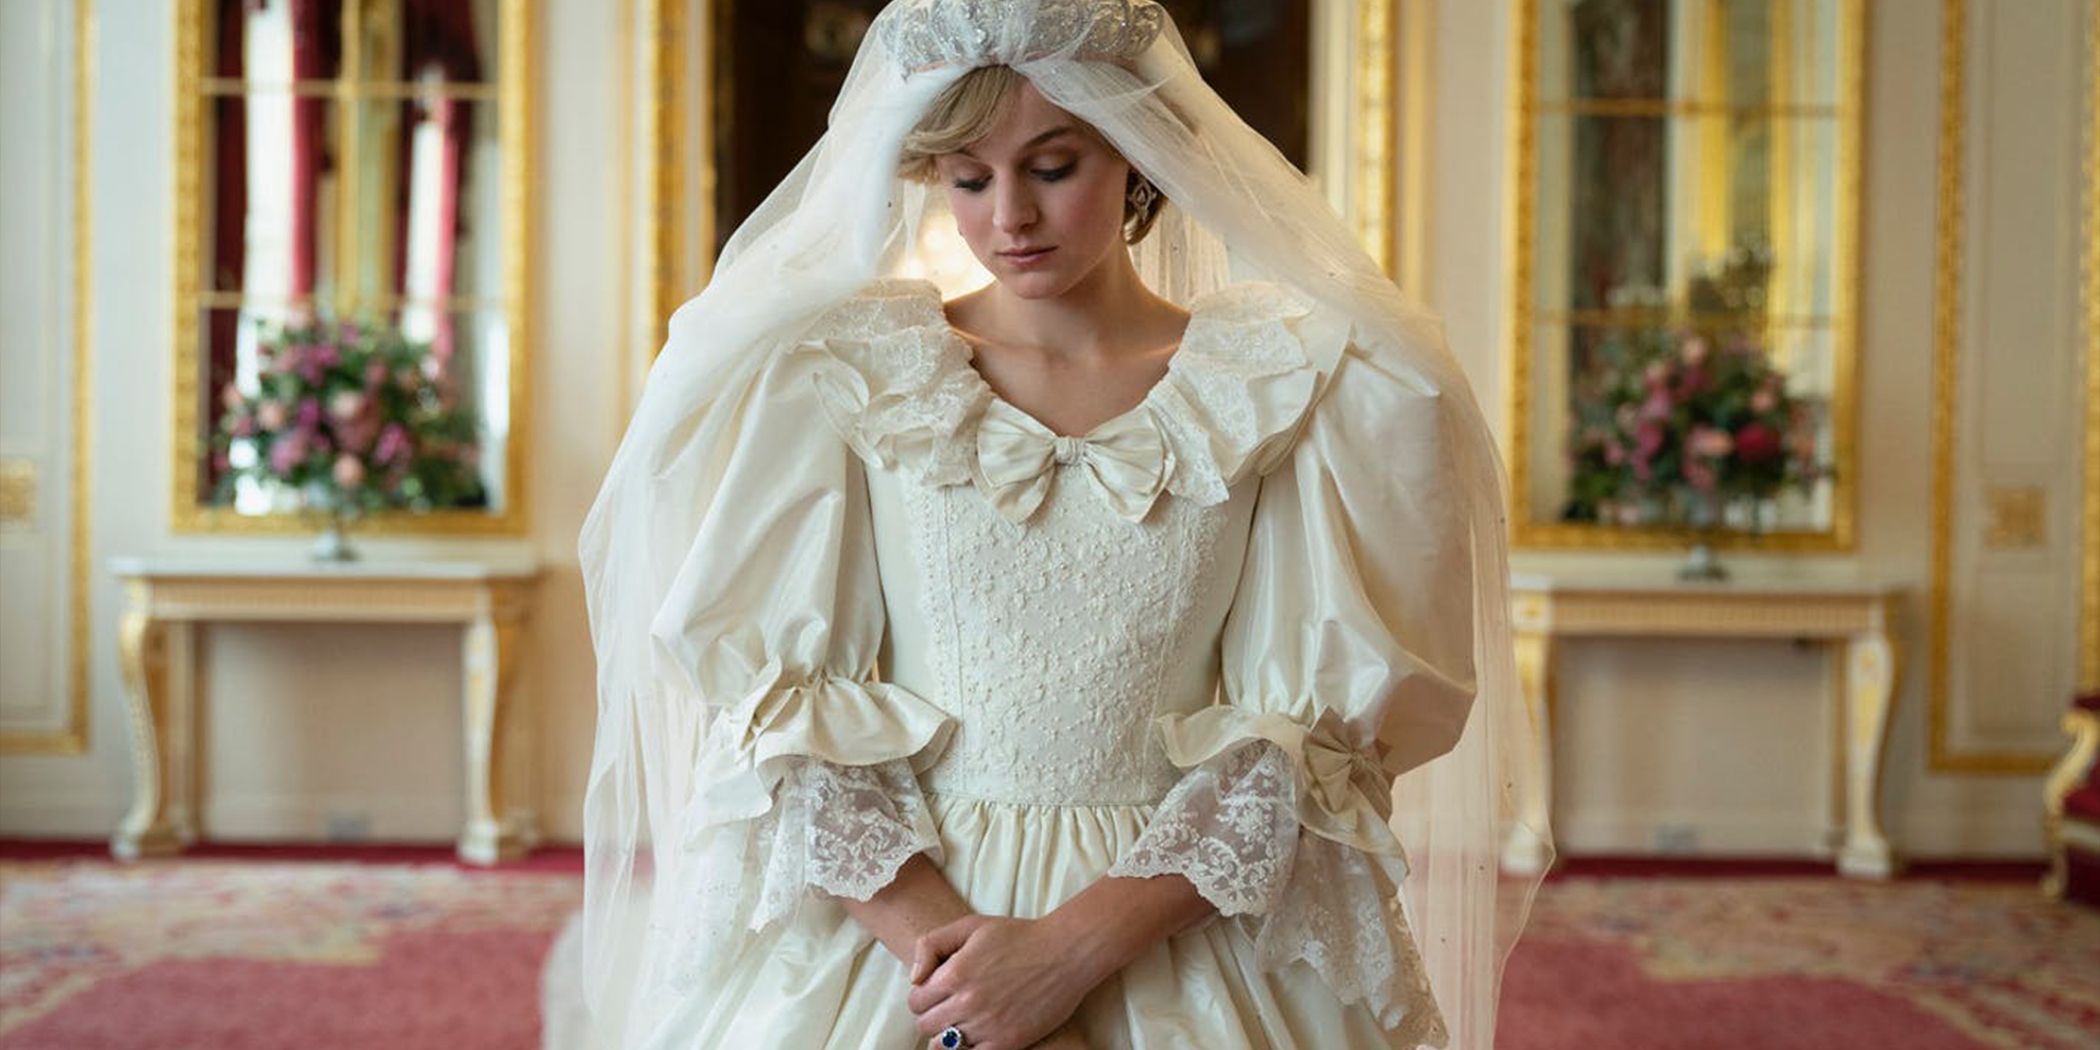 Diana looking sad in her wedding dress in The Crown